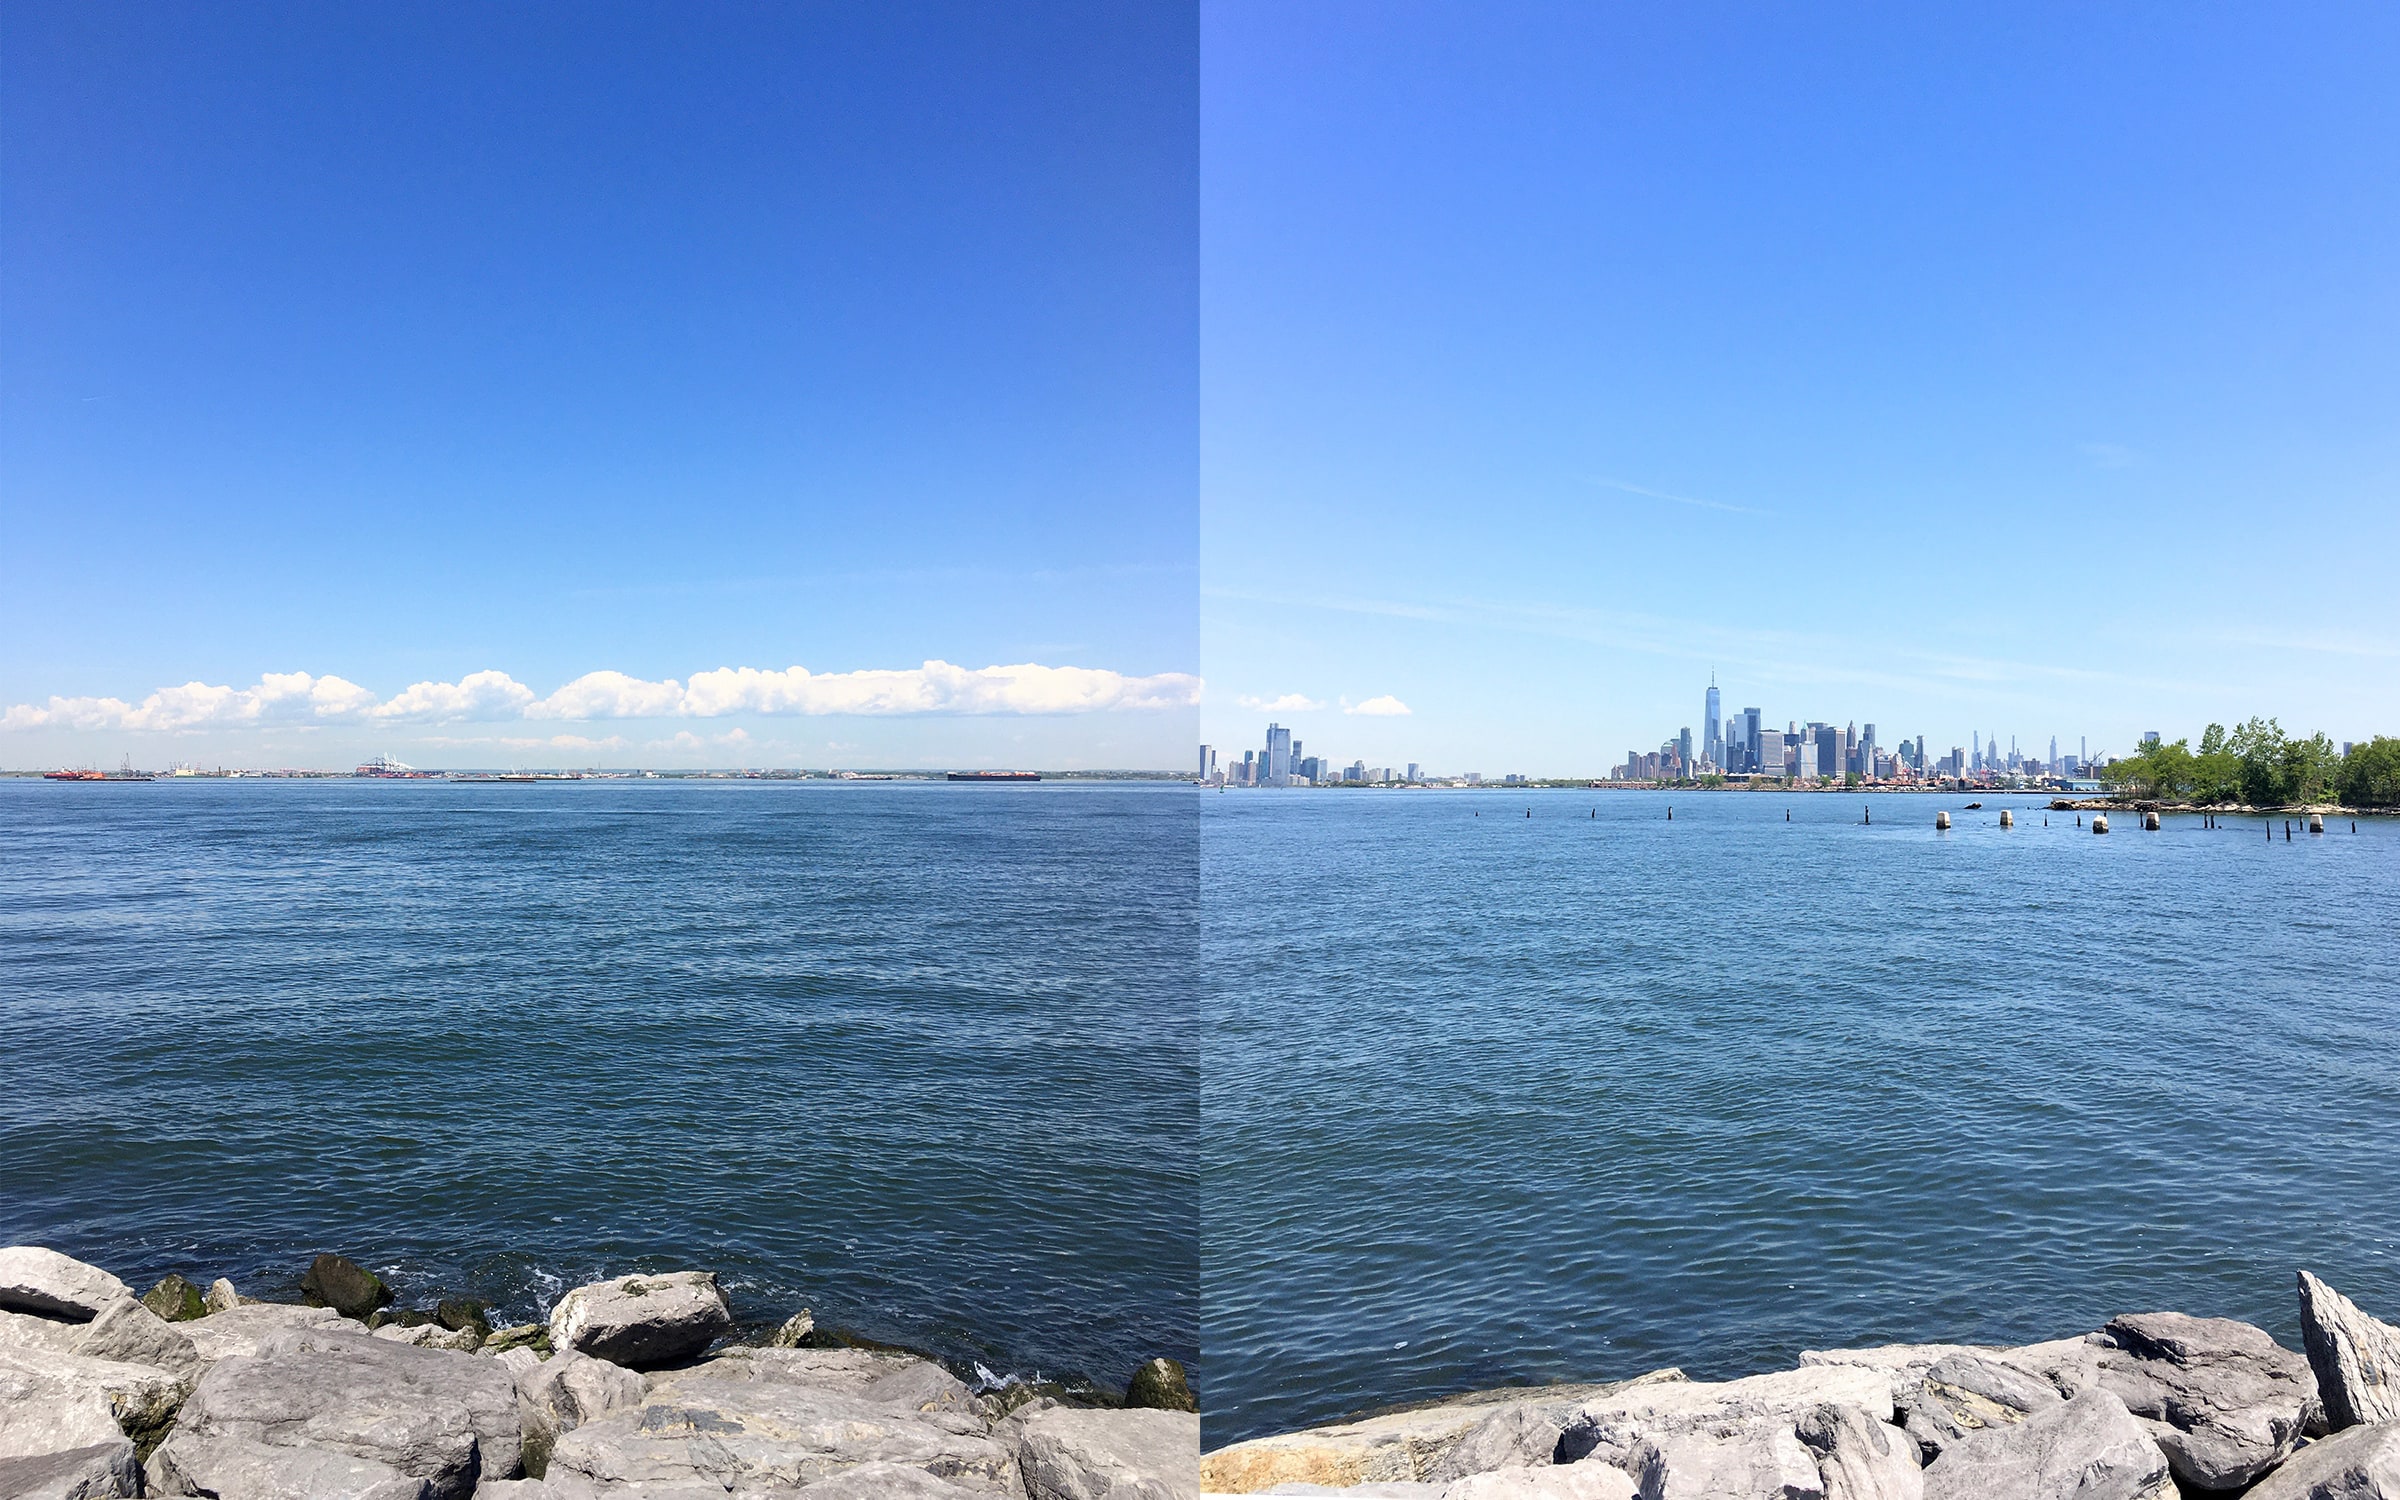 Diptych photo of the view from the jetty in Bush Terminal Park AKA Cat Park. Left photo is facing northwest, and beyond the Upper Bay you can see New Jersey; above there is a strip of cloud on a blue sky. Right photo is facing north, and you can see part of Red Hook, Governor’s Island, and the Manhattan skyline.